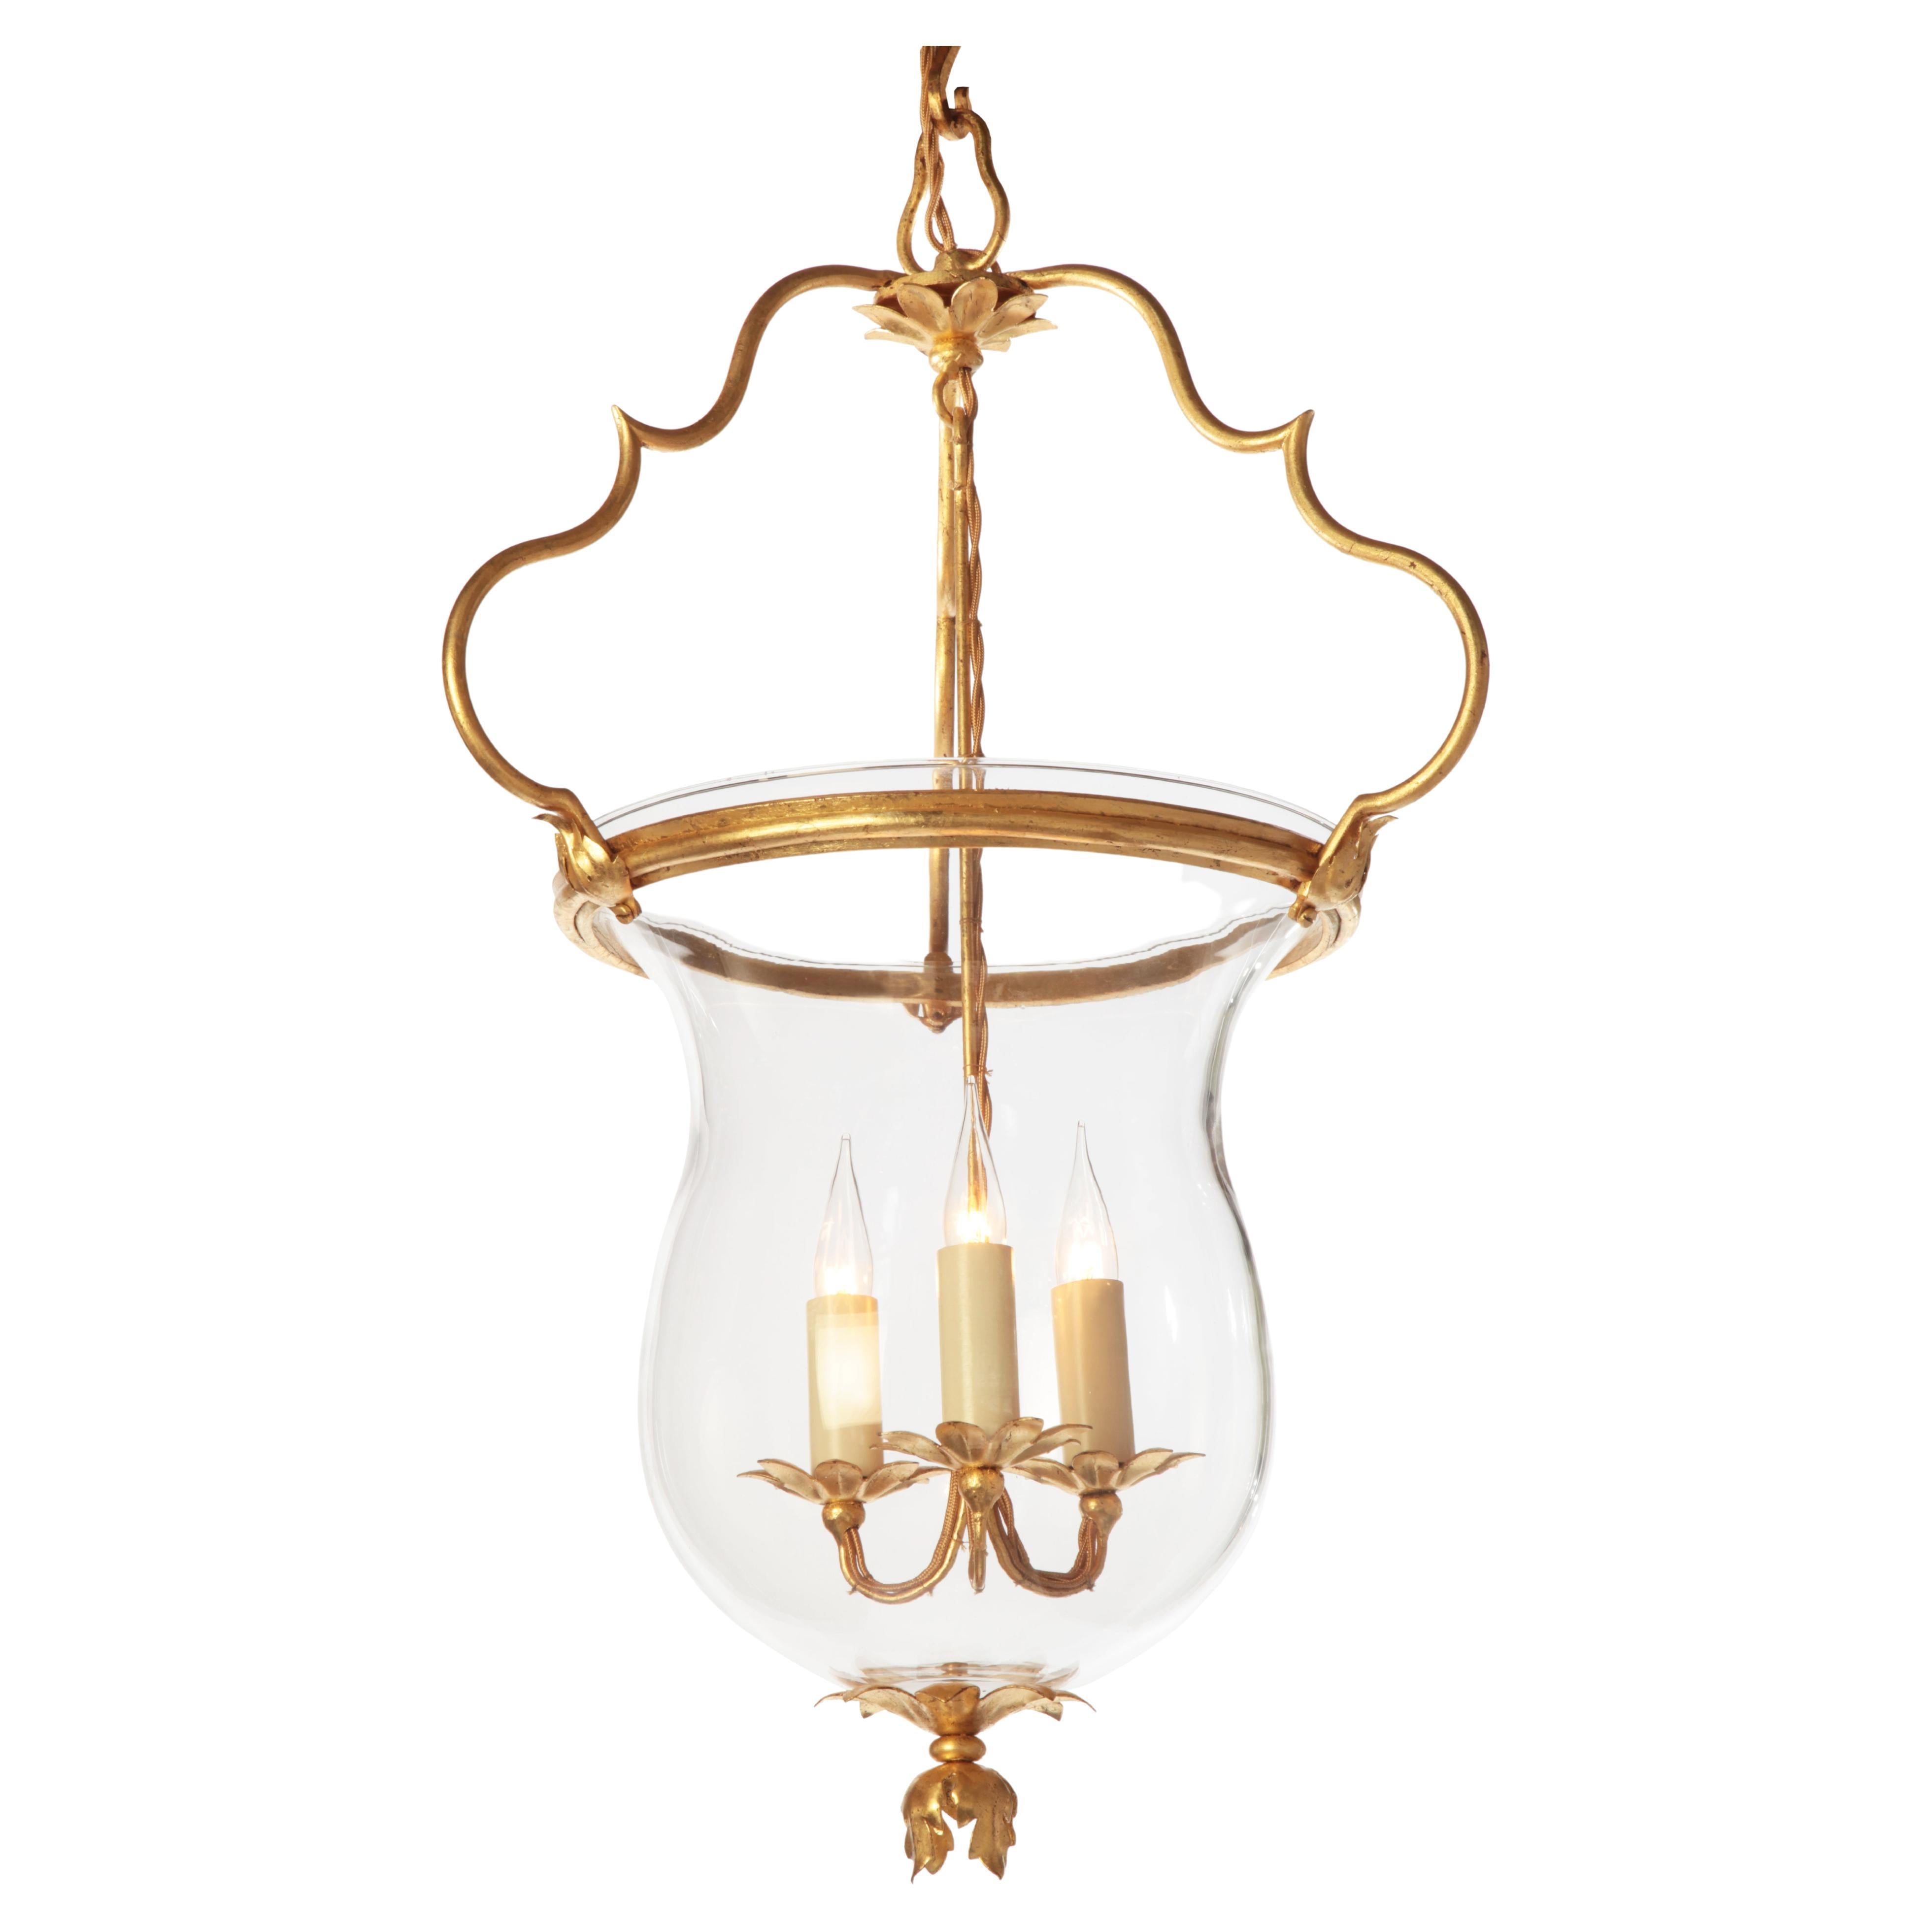 Certified Maison Bagues Lantern, 3 Lights Iron #17998 For Sale